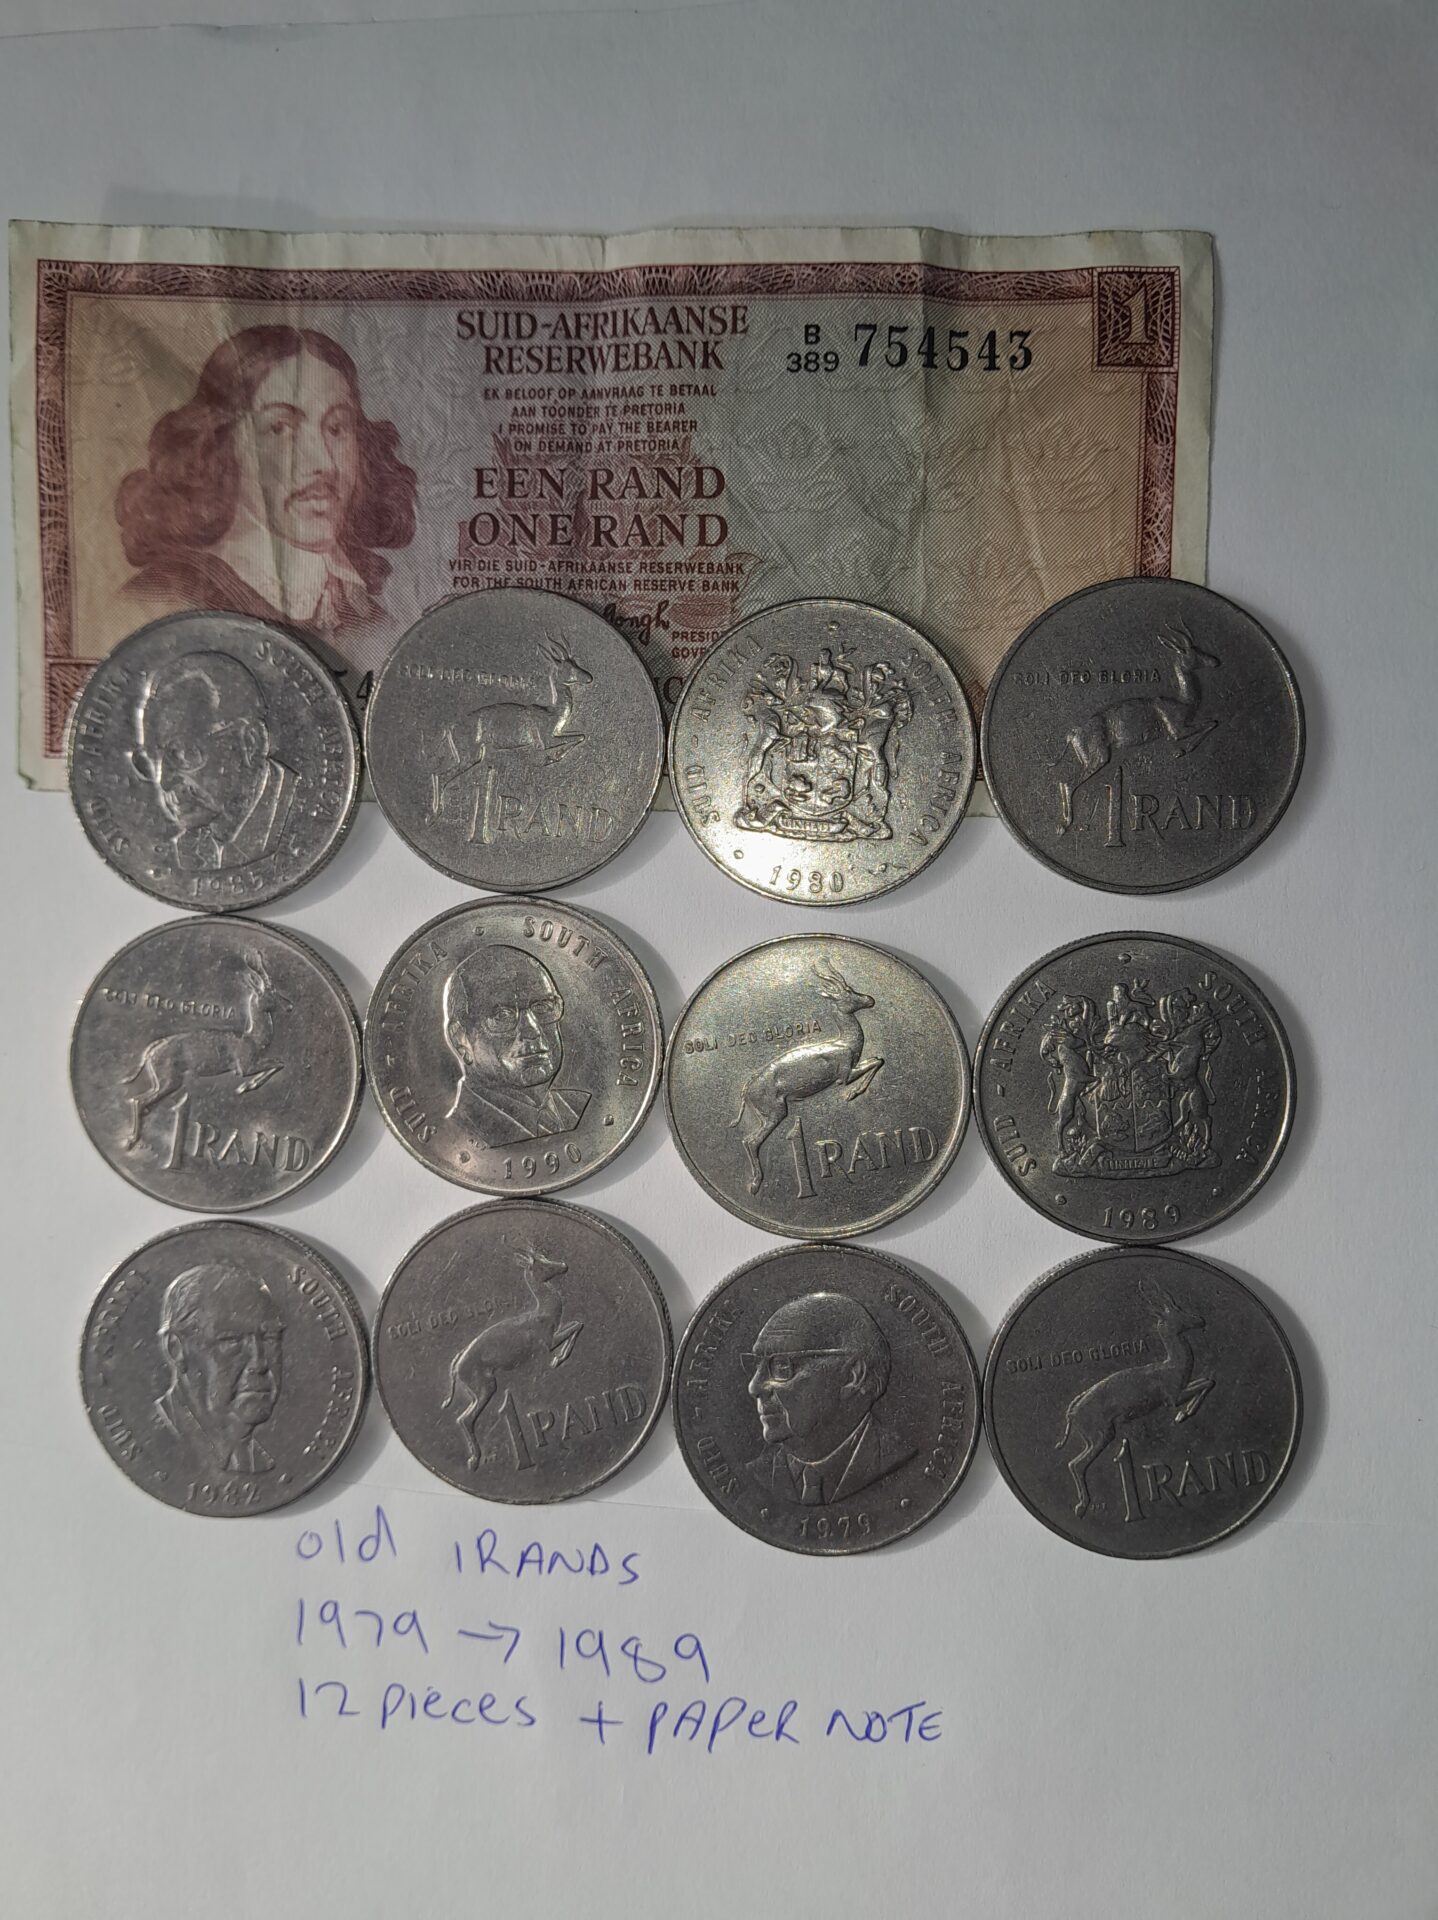 Old South african 1rand coins +note